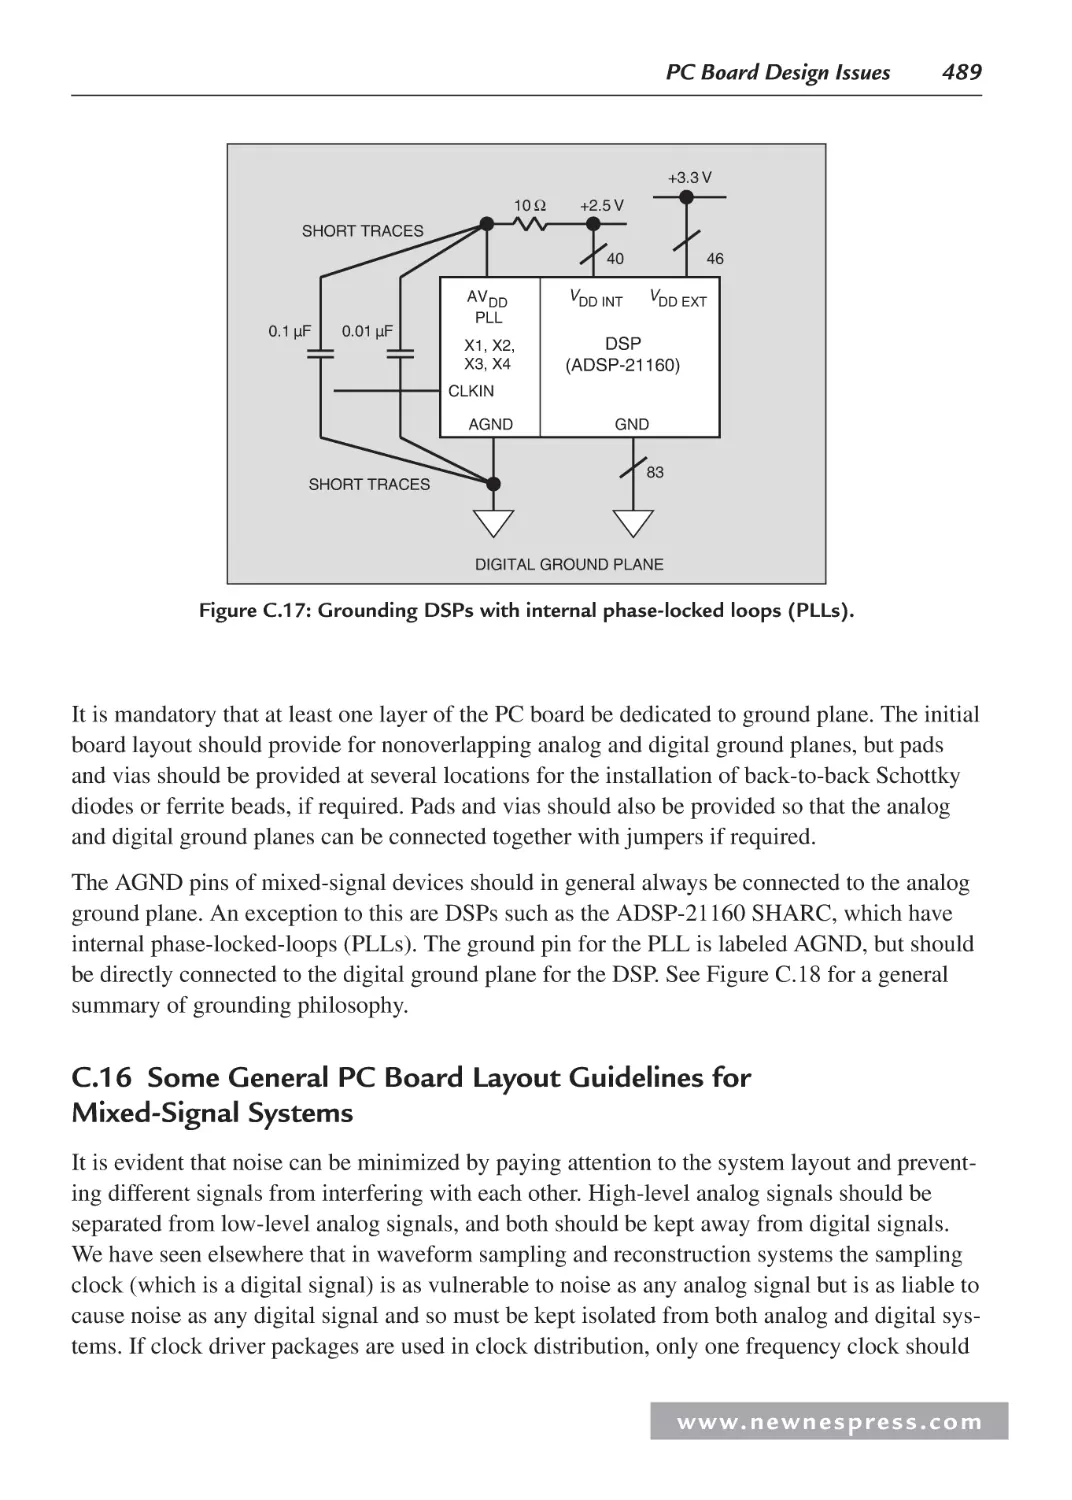 C.16 Some General PC Board Layout Guidelines for Mixed-Signal Systems